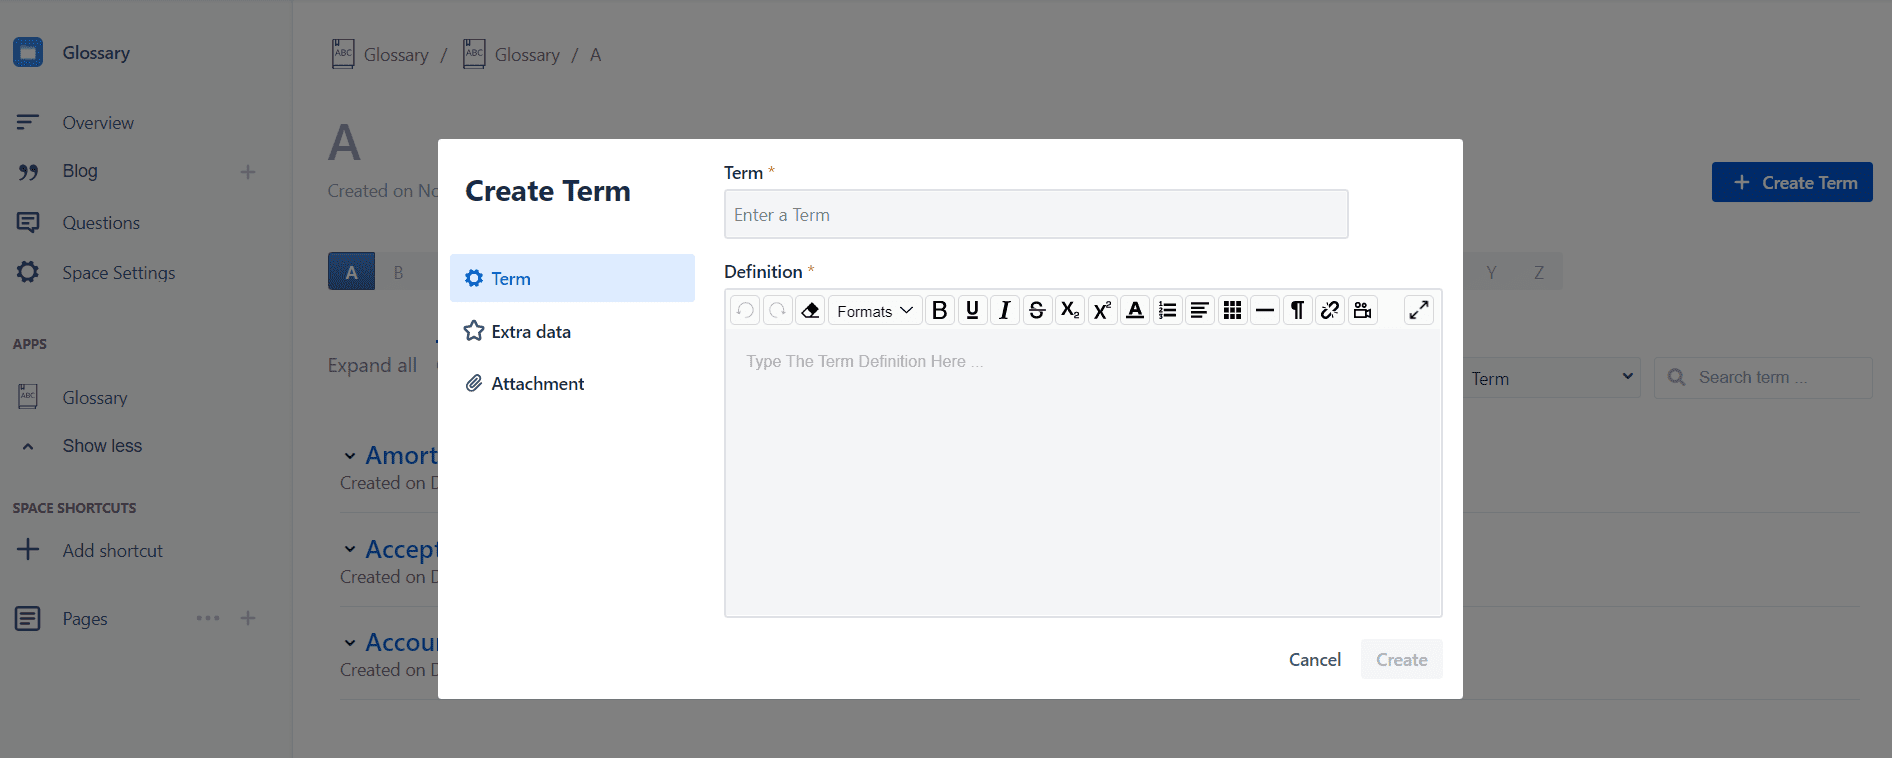 create term in confluence 